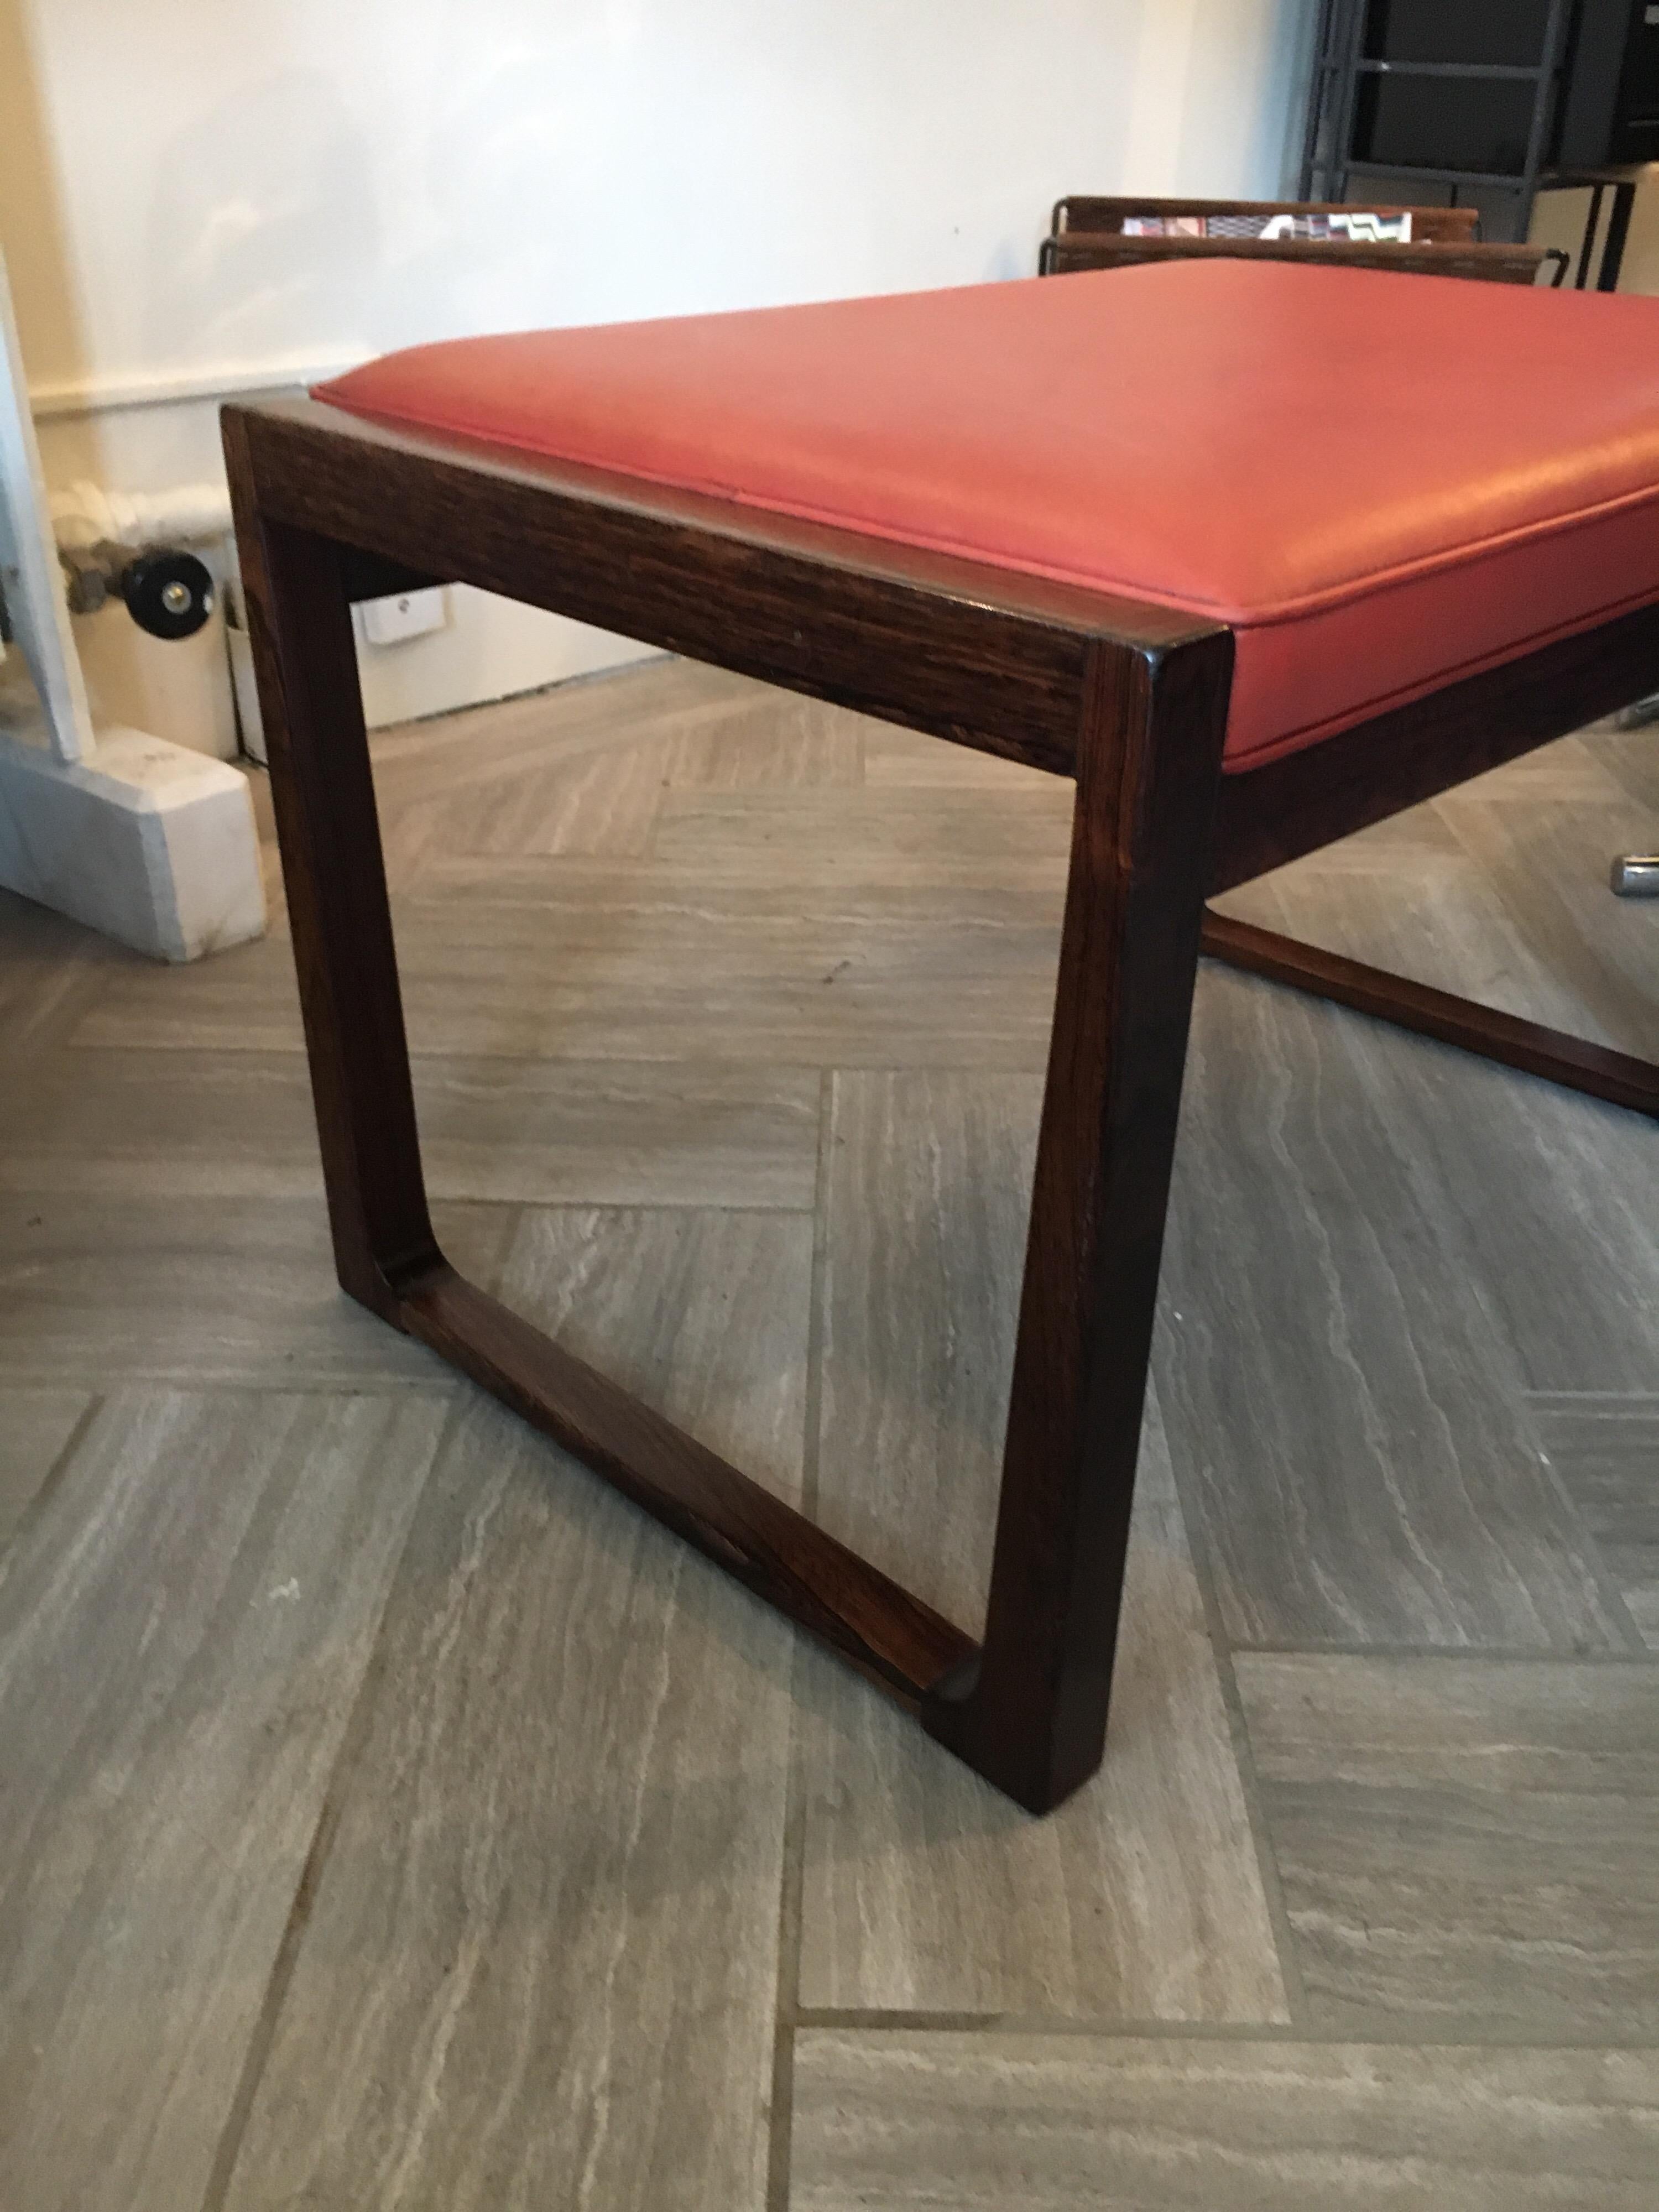 Chic little Danish modern rosewood bench with original rust red leather, circa 1960s. Can be used as a footstool, an extra seat, or as a coffee table or ottoman to add a touch of Mid Century Modern style.